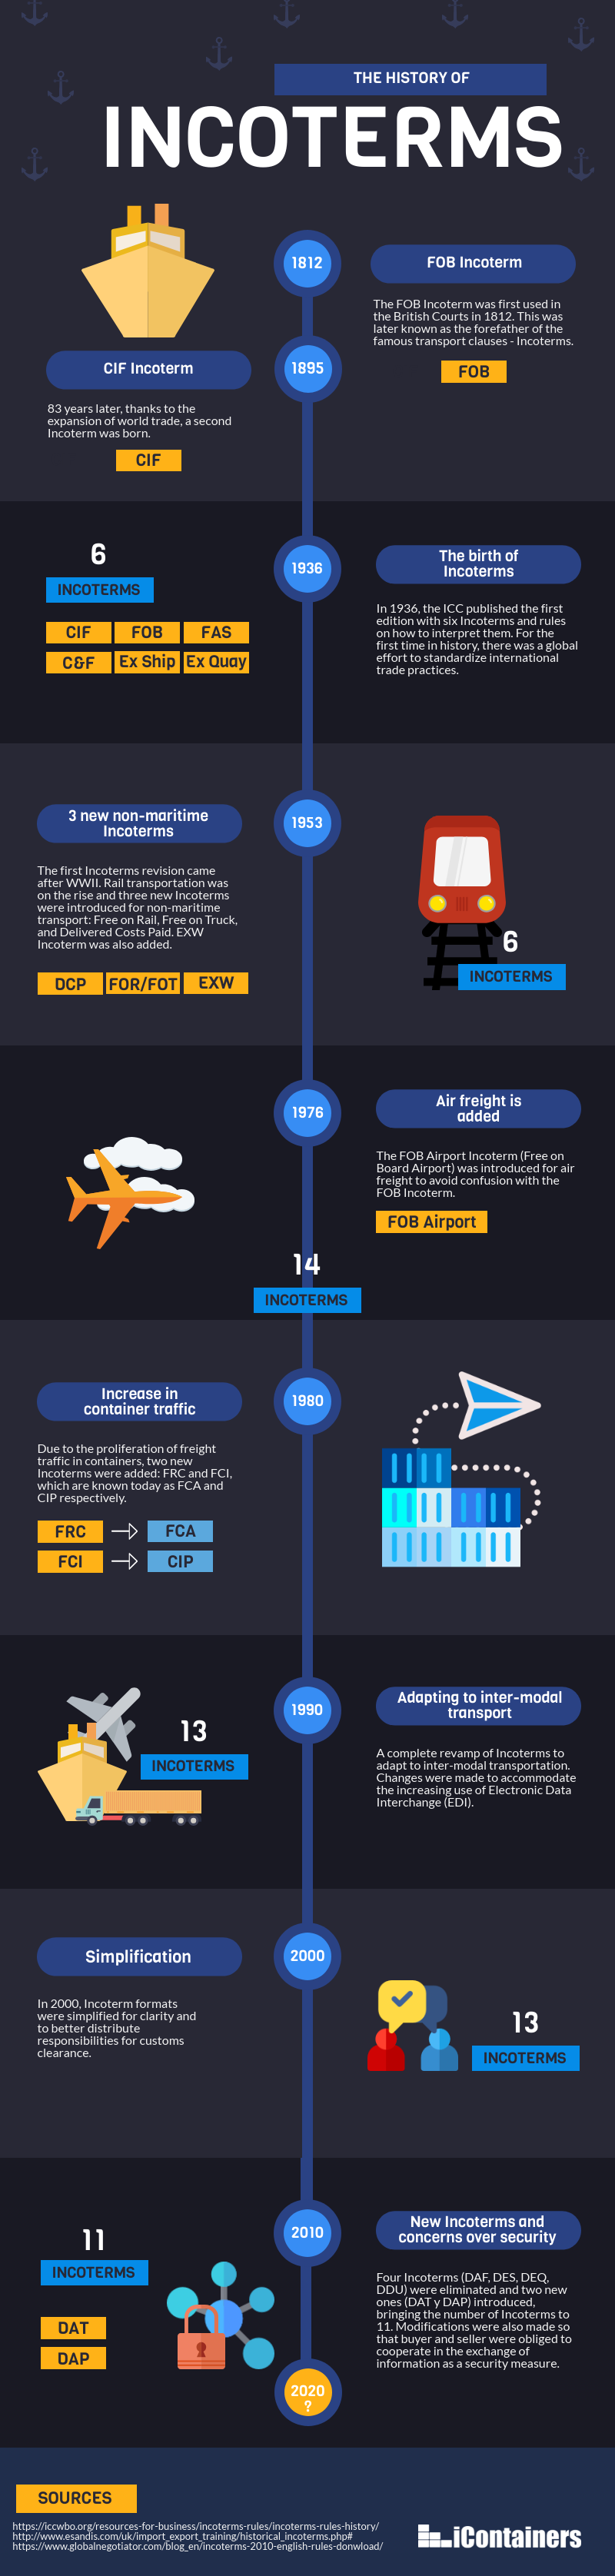 history-of-incoterms-infographic.png